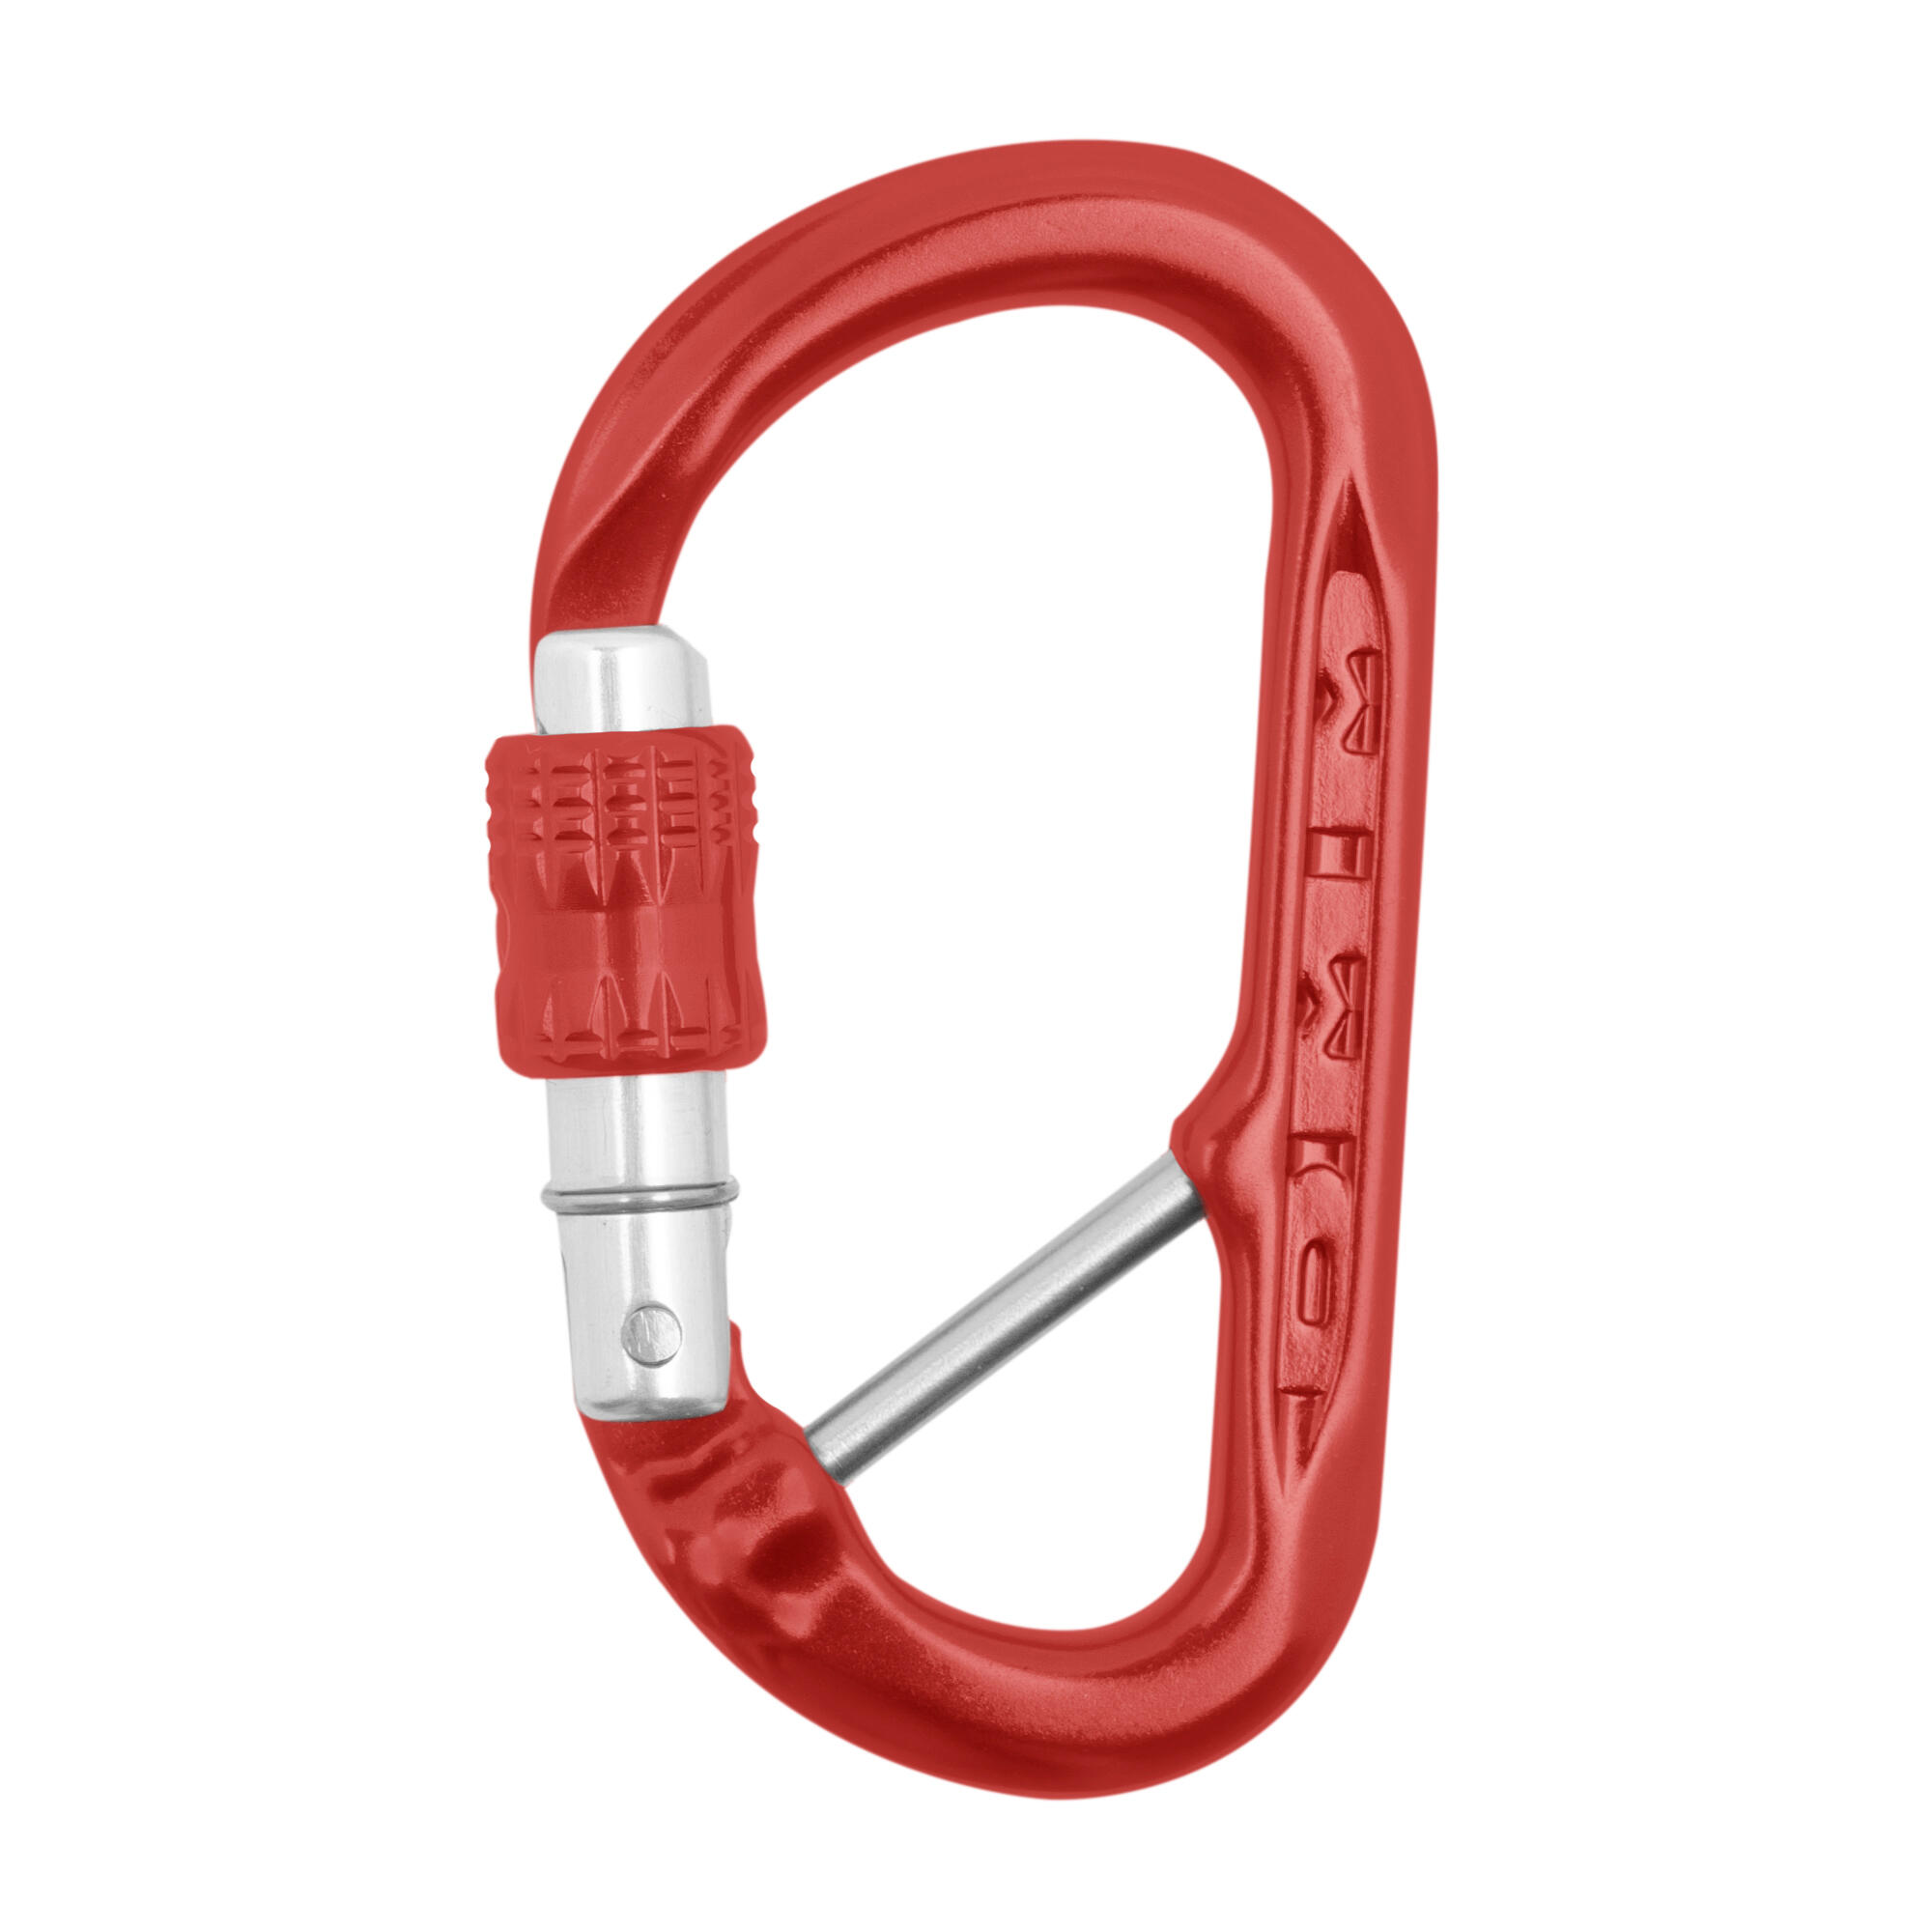 DMM XSRE Lock Captive Bar Accessory Carabiner - Red